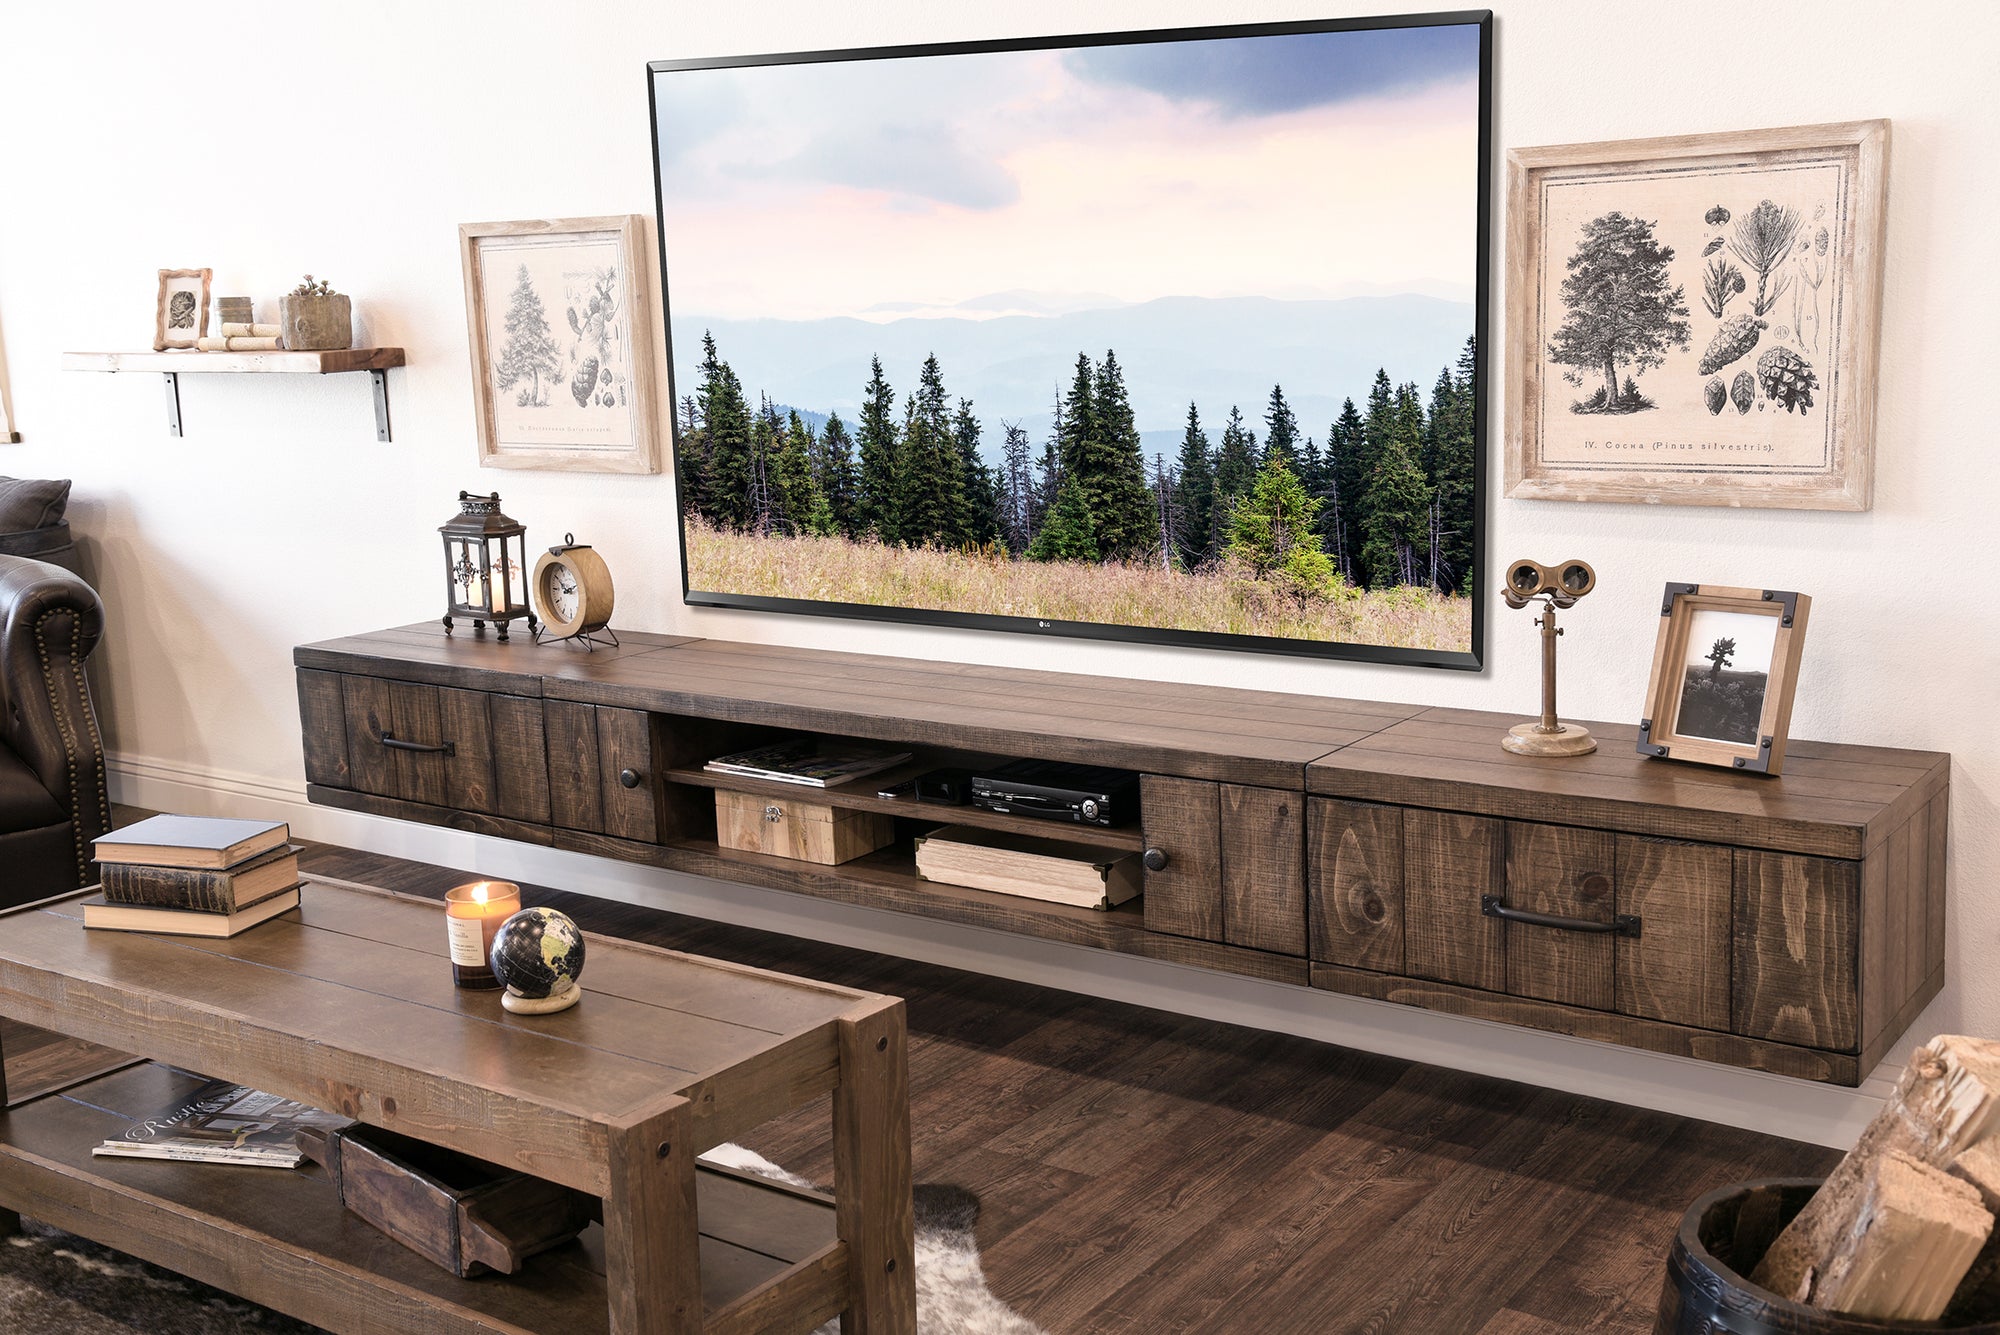 Farmhouse Rustic Wood Floating TV Stand Entertainment Center - Spice